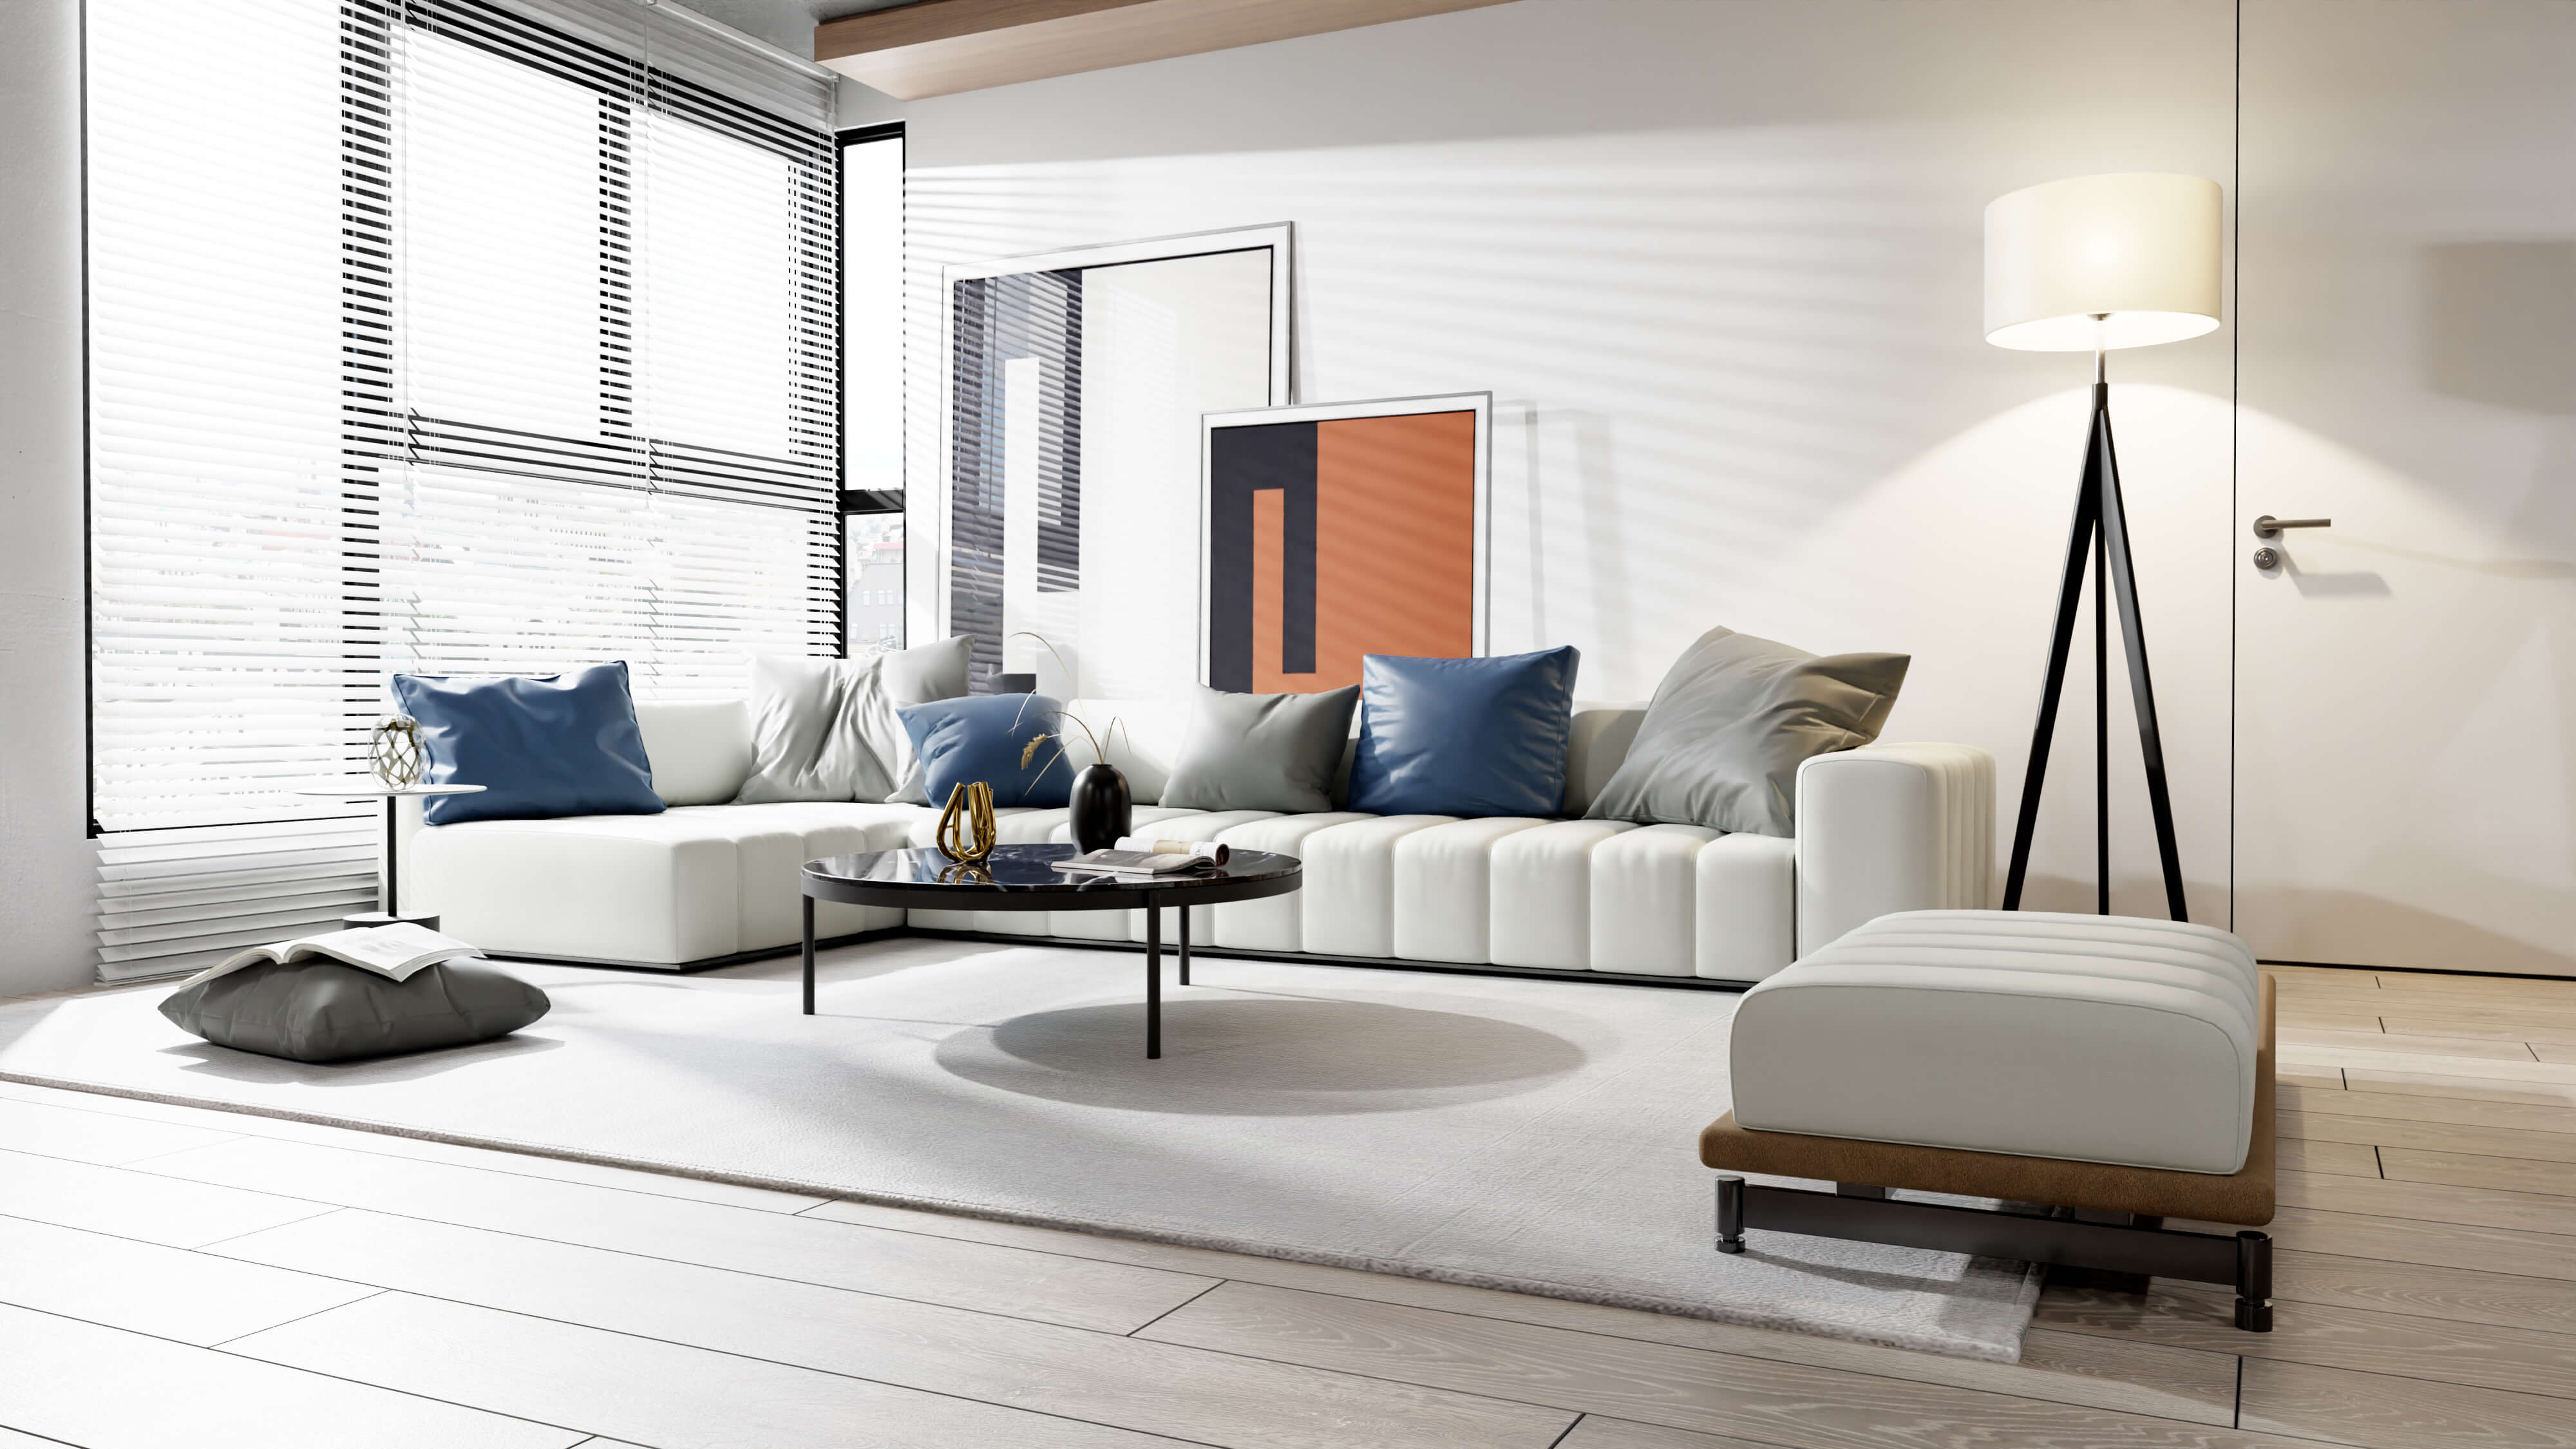 White sectional couch with blue and gray pillows and white ottoman in modern light-filled living room with big windows.